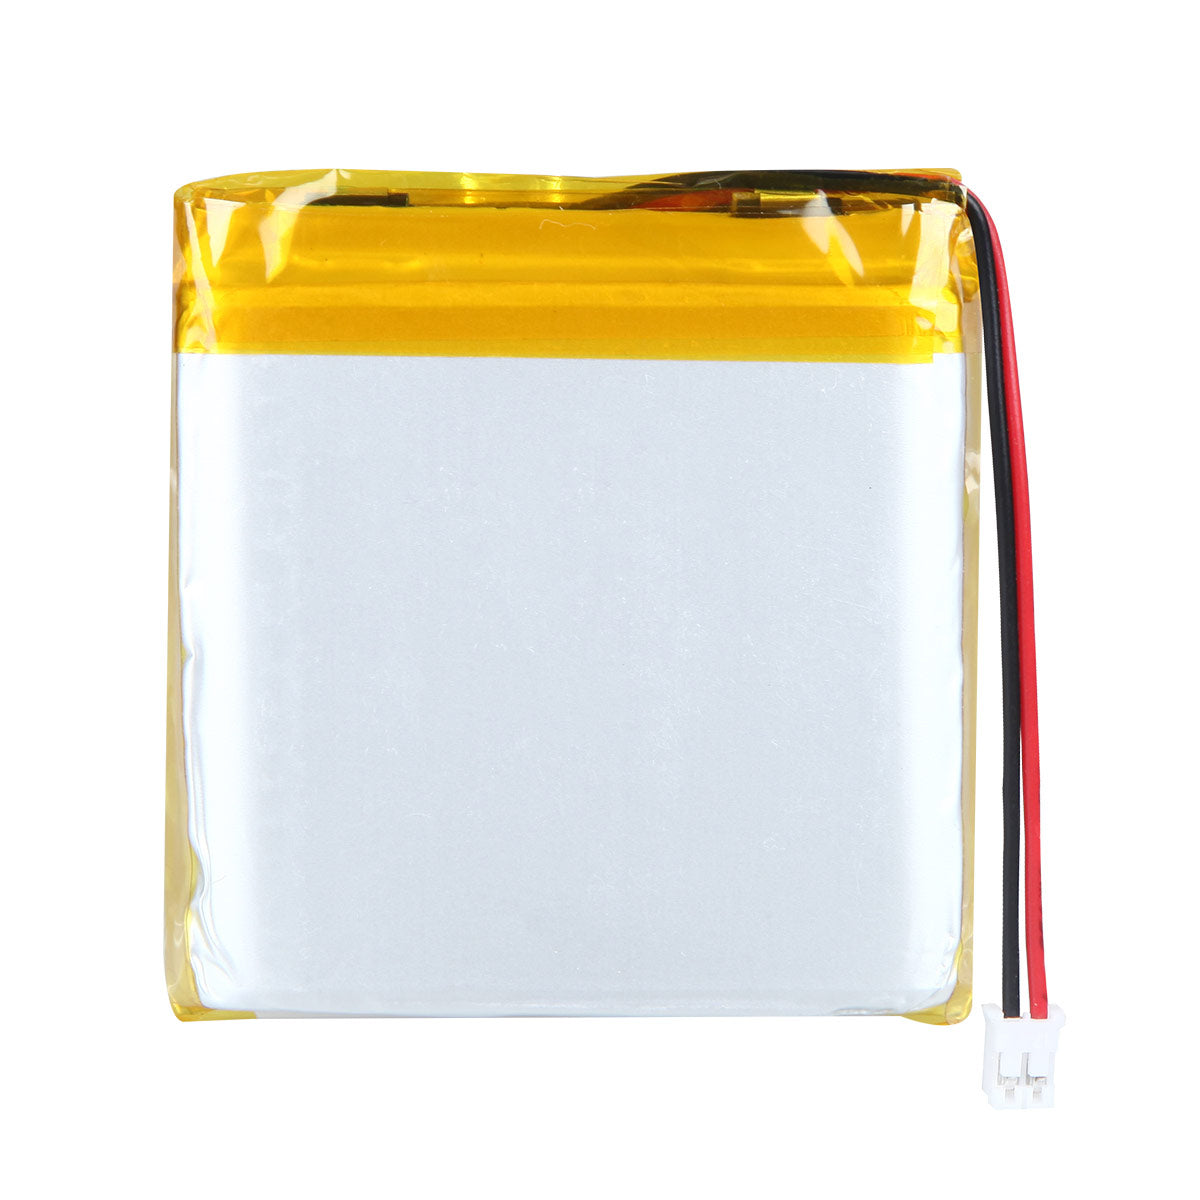 3.7V 5000mAh 115659 Rechargeable Lithium Polymer Battery